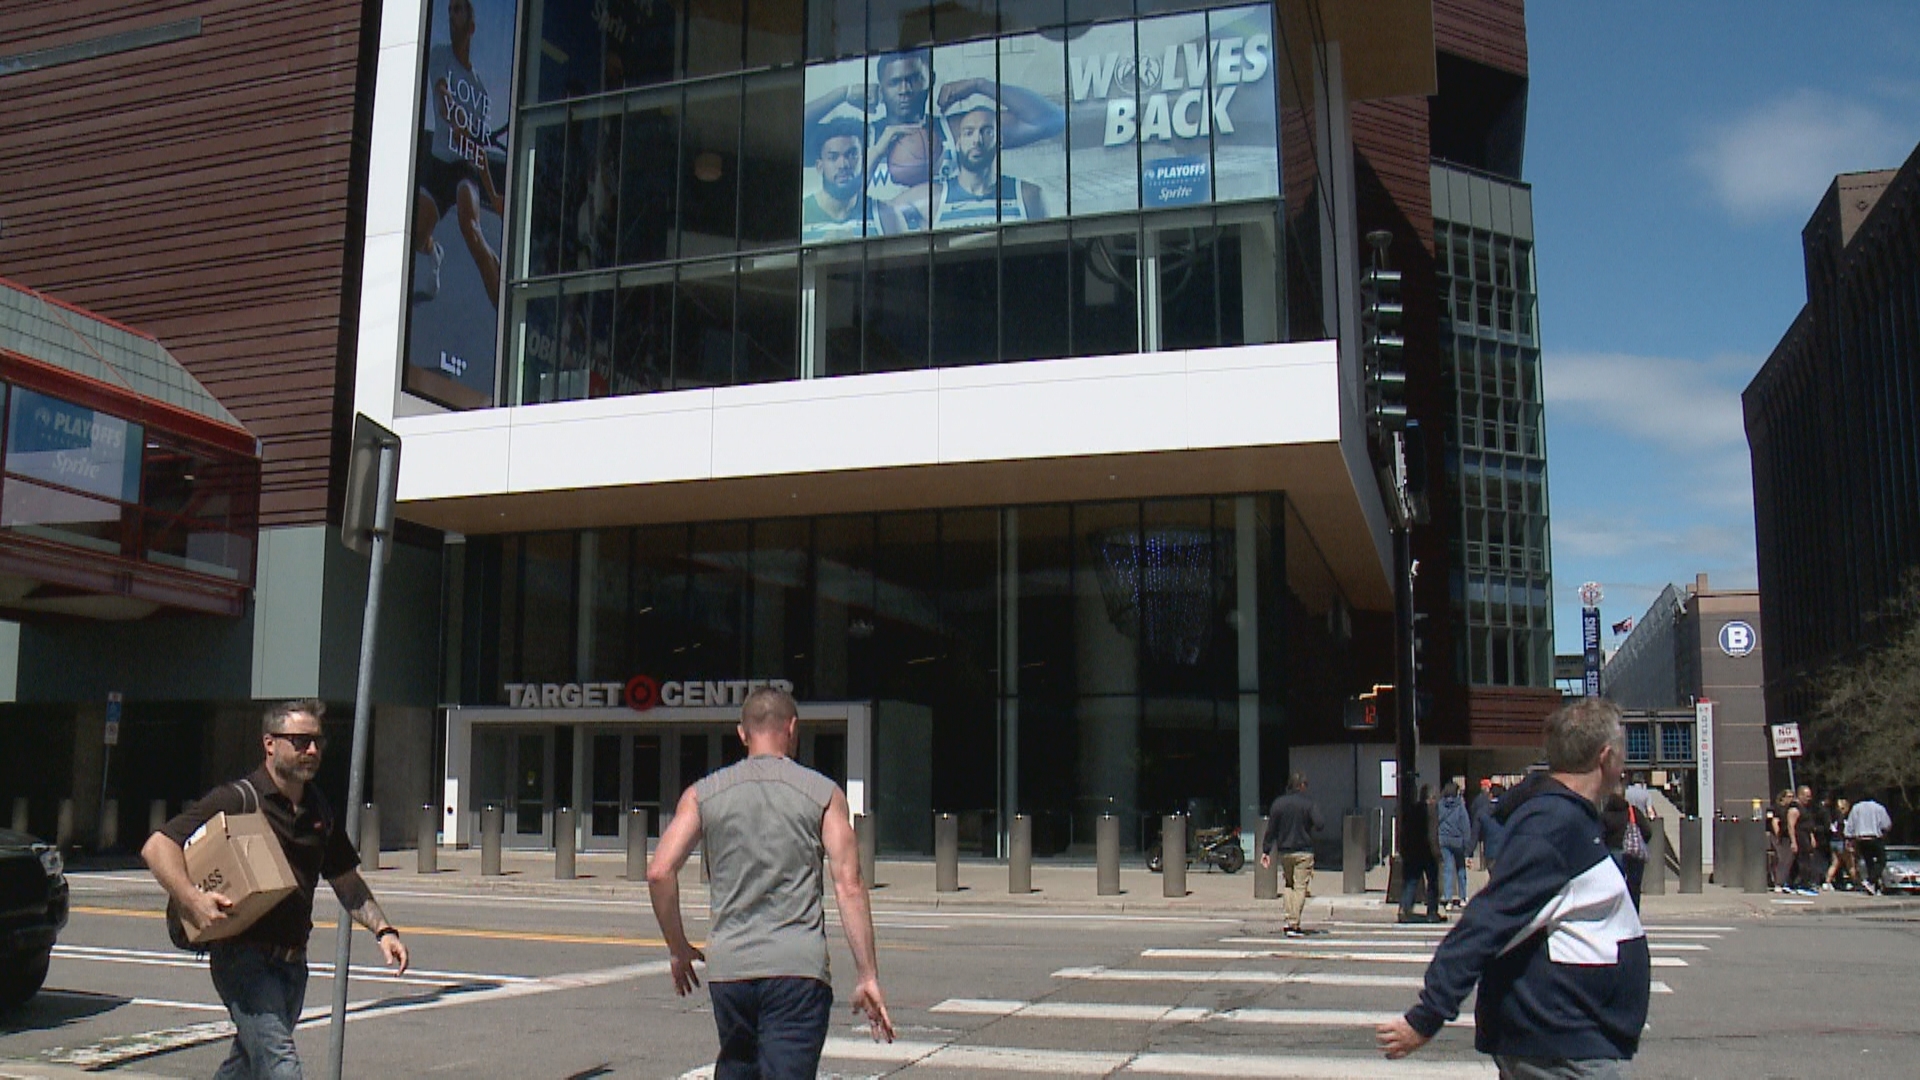 Downtown Minneapolis will be packed with fans as the Timberwolves face the Nuggets in Game 3 of the Western Conference semifinals at Target Center.